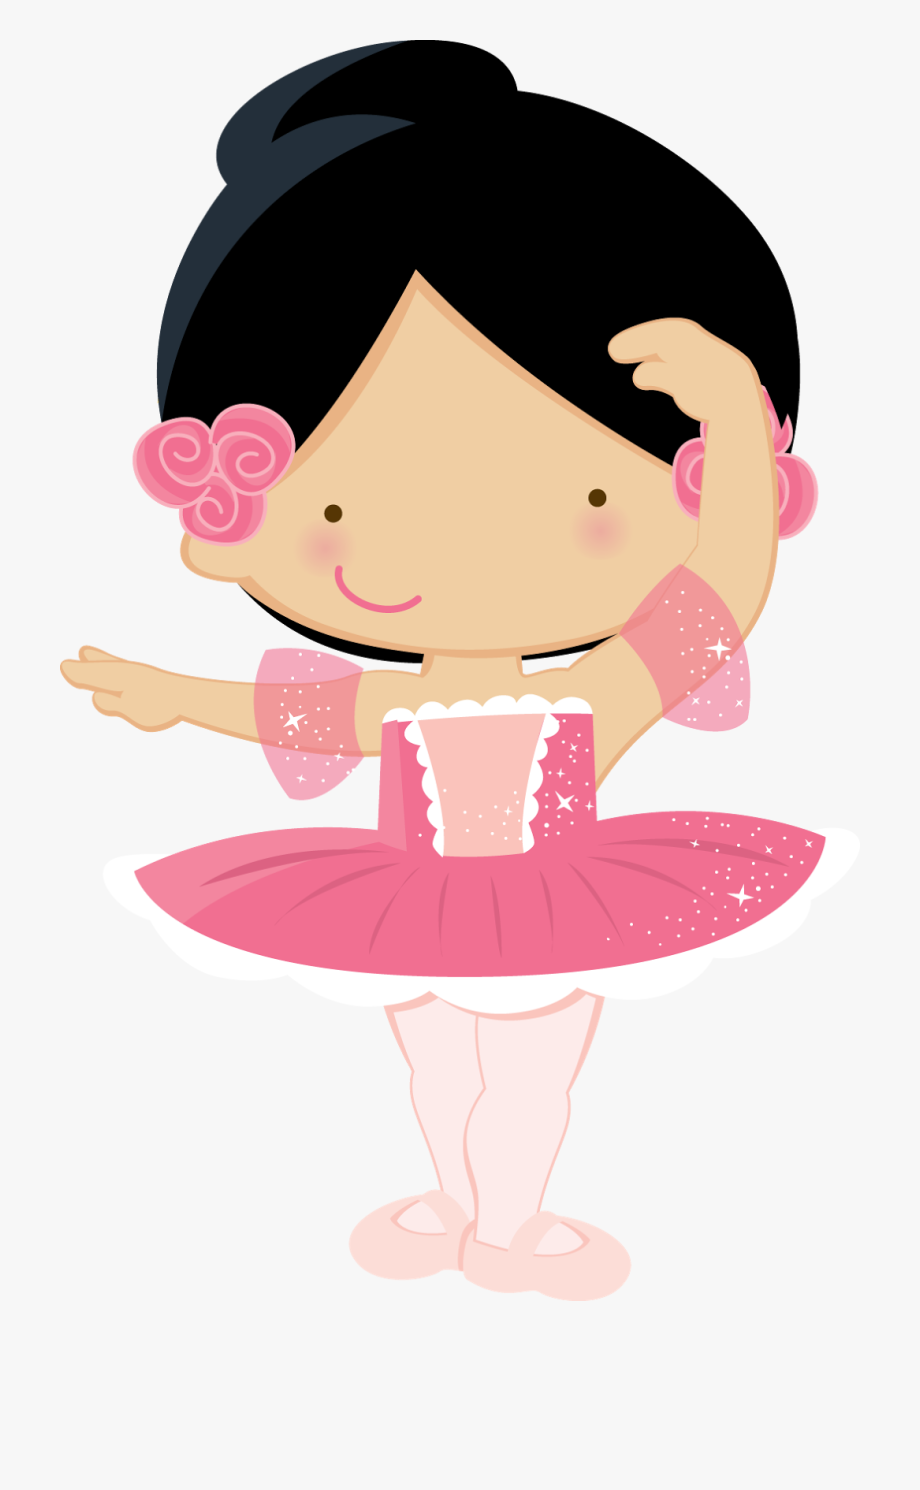 Image result for ballerina. Ballet clipart cute baby